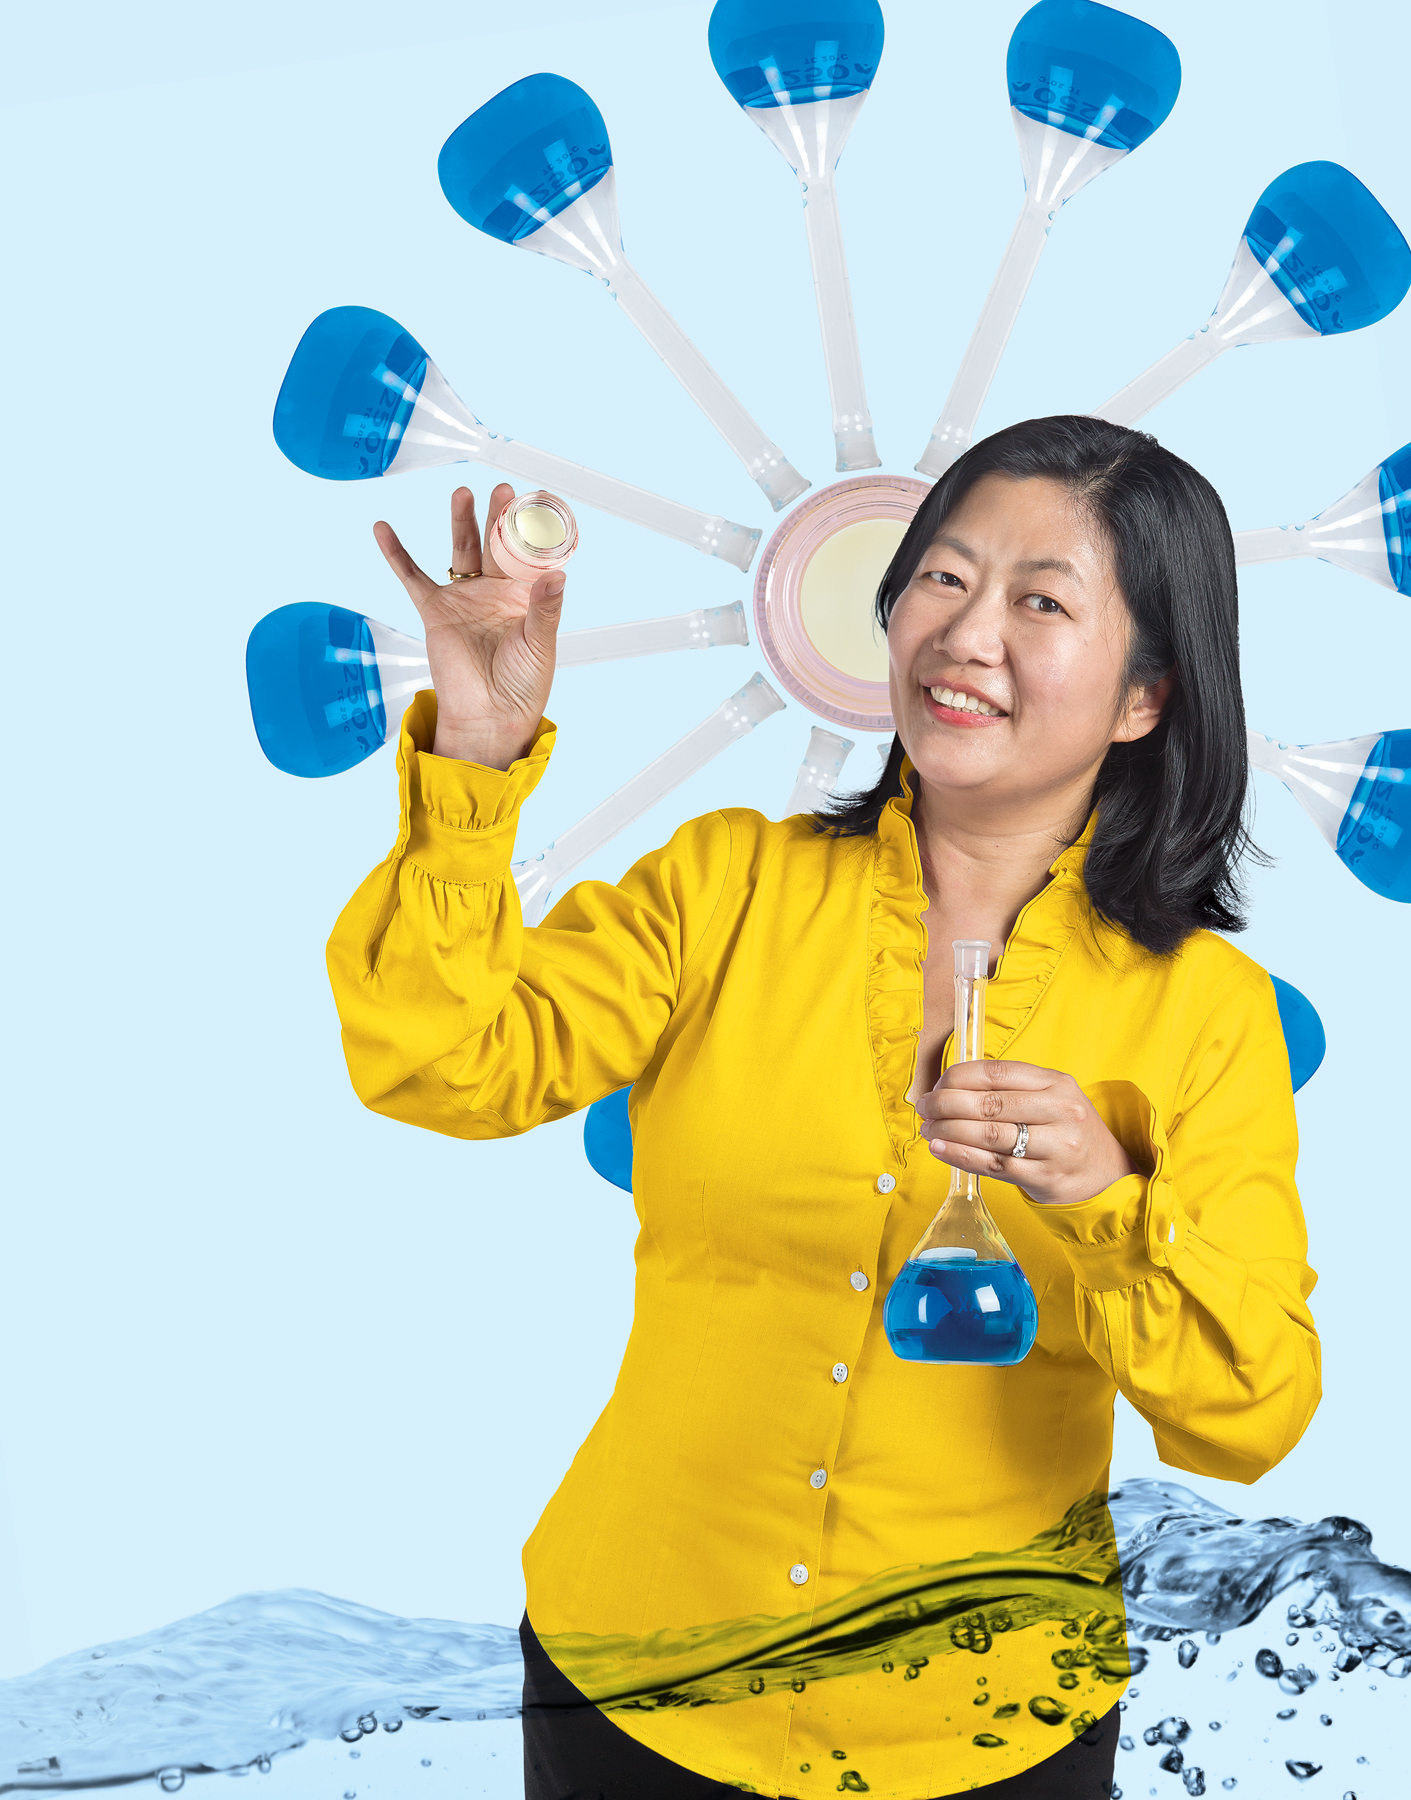 A photo illustration of Kan Cao. She is wearing a bright yellow shirt and appears to be standing in blue liquid. She is holding a flask containing blue liquid and holding a pink glass container filled with cream. Behind her, against a light blue background, is an arrangement of flasks with blue fluid in them arranged in a circle around a pink glass container, giving the impression of a flower.